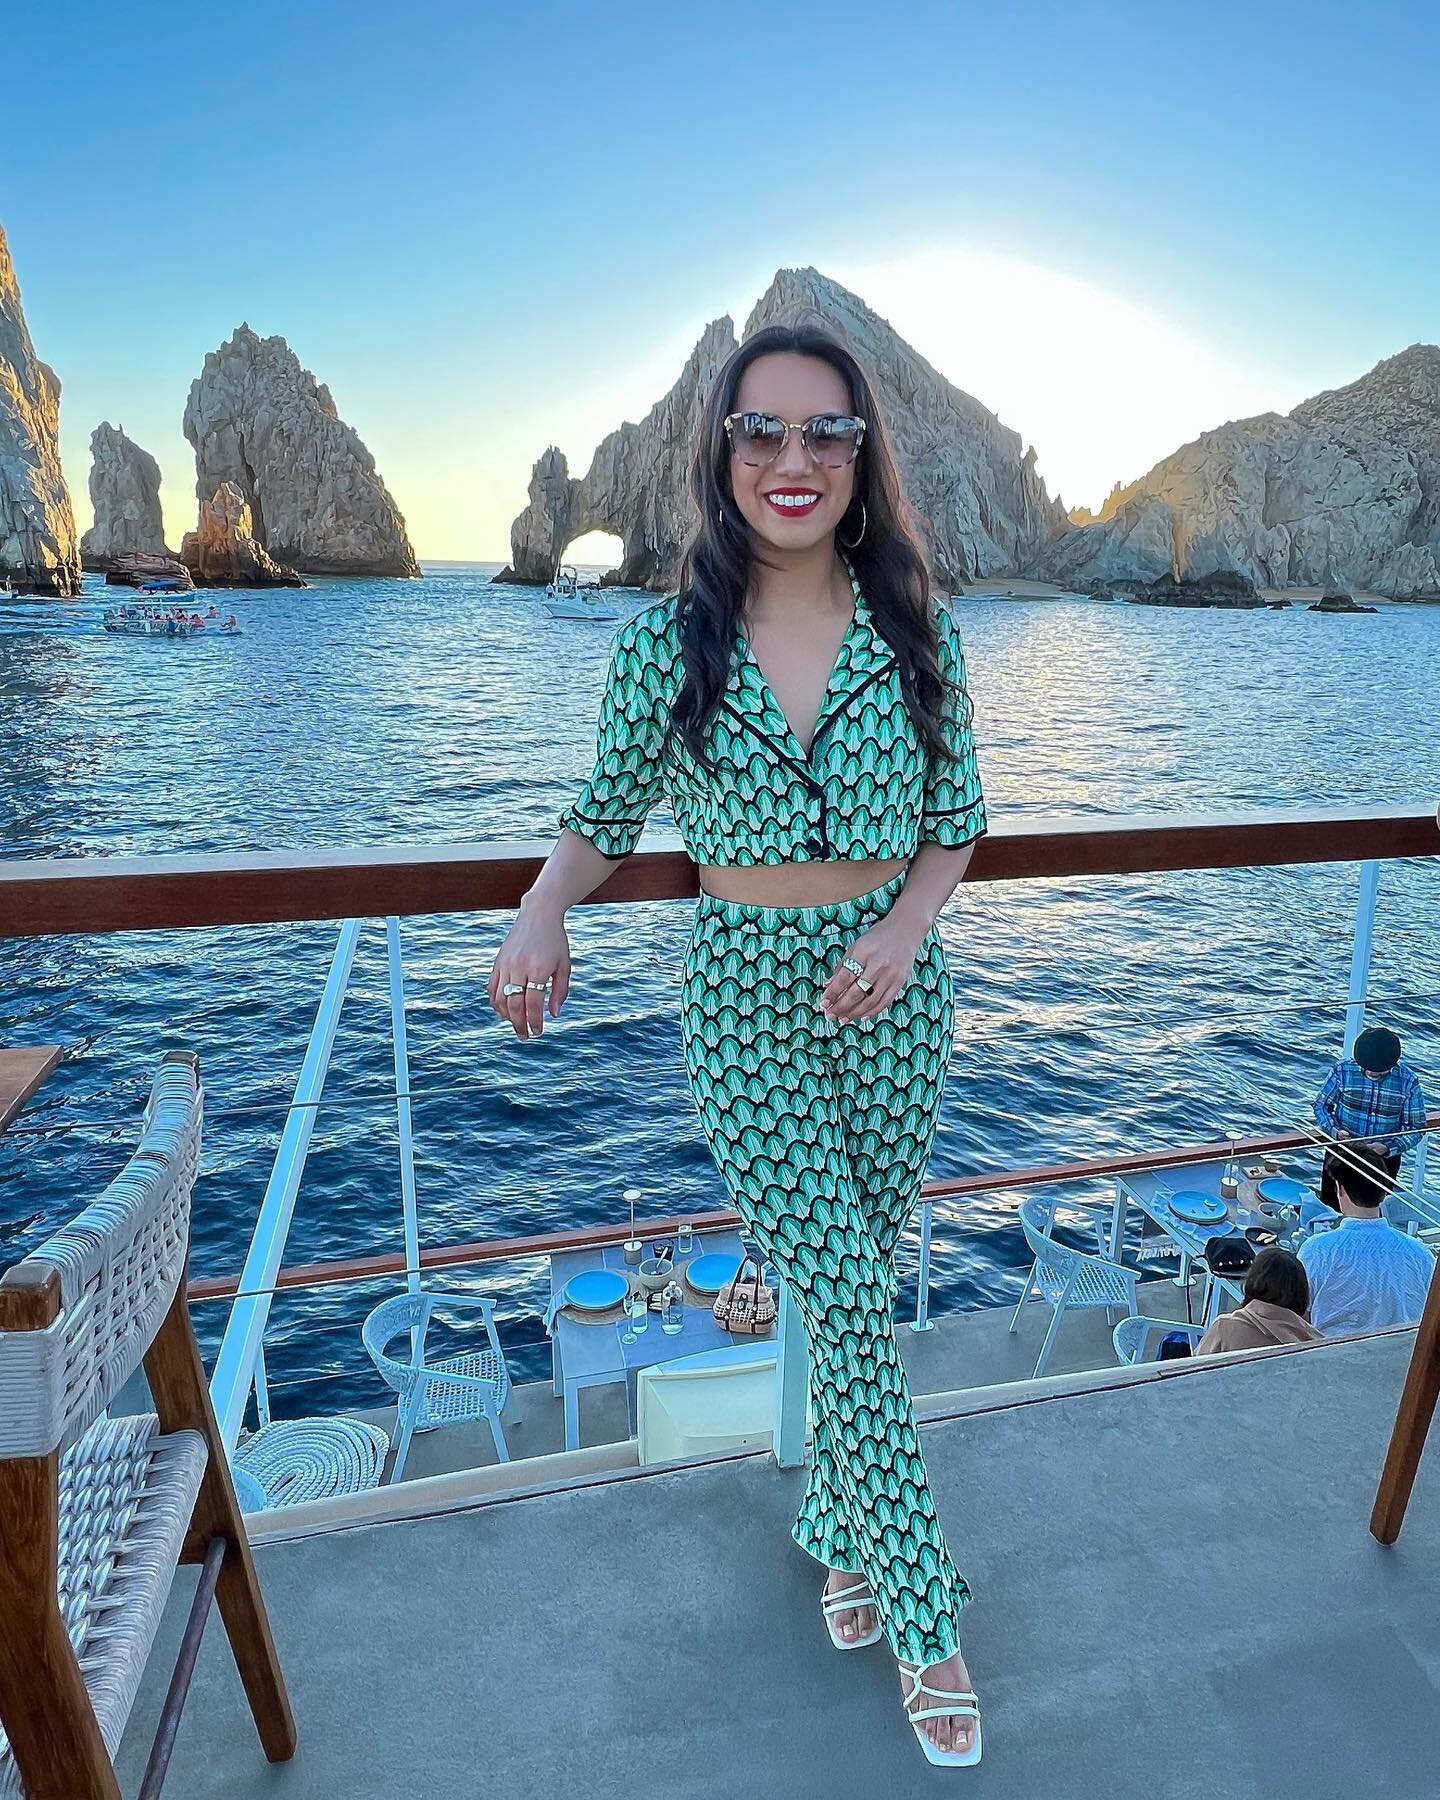 Los Cabos photo dump 🌊🏝️🐟🐚☀️🏊🏽&zwj;♀️
1. Best dining experience at @animalonbythesea 
2. Mexican cuisine by @javierplascencia 
3. Dreamy sunset
4. Caviar for dinner
5. Sailing moment
6. Palmilla beach
7. Yatch selfie with my dad
8. El arco
&bul